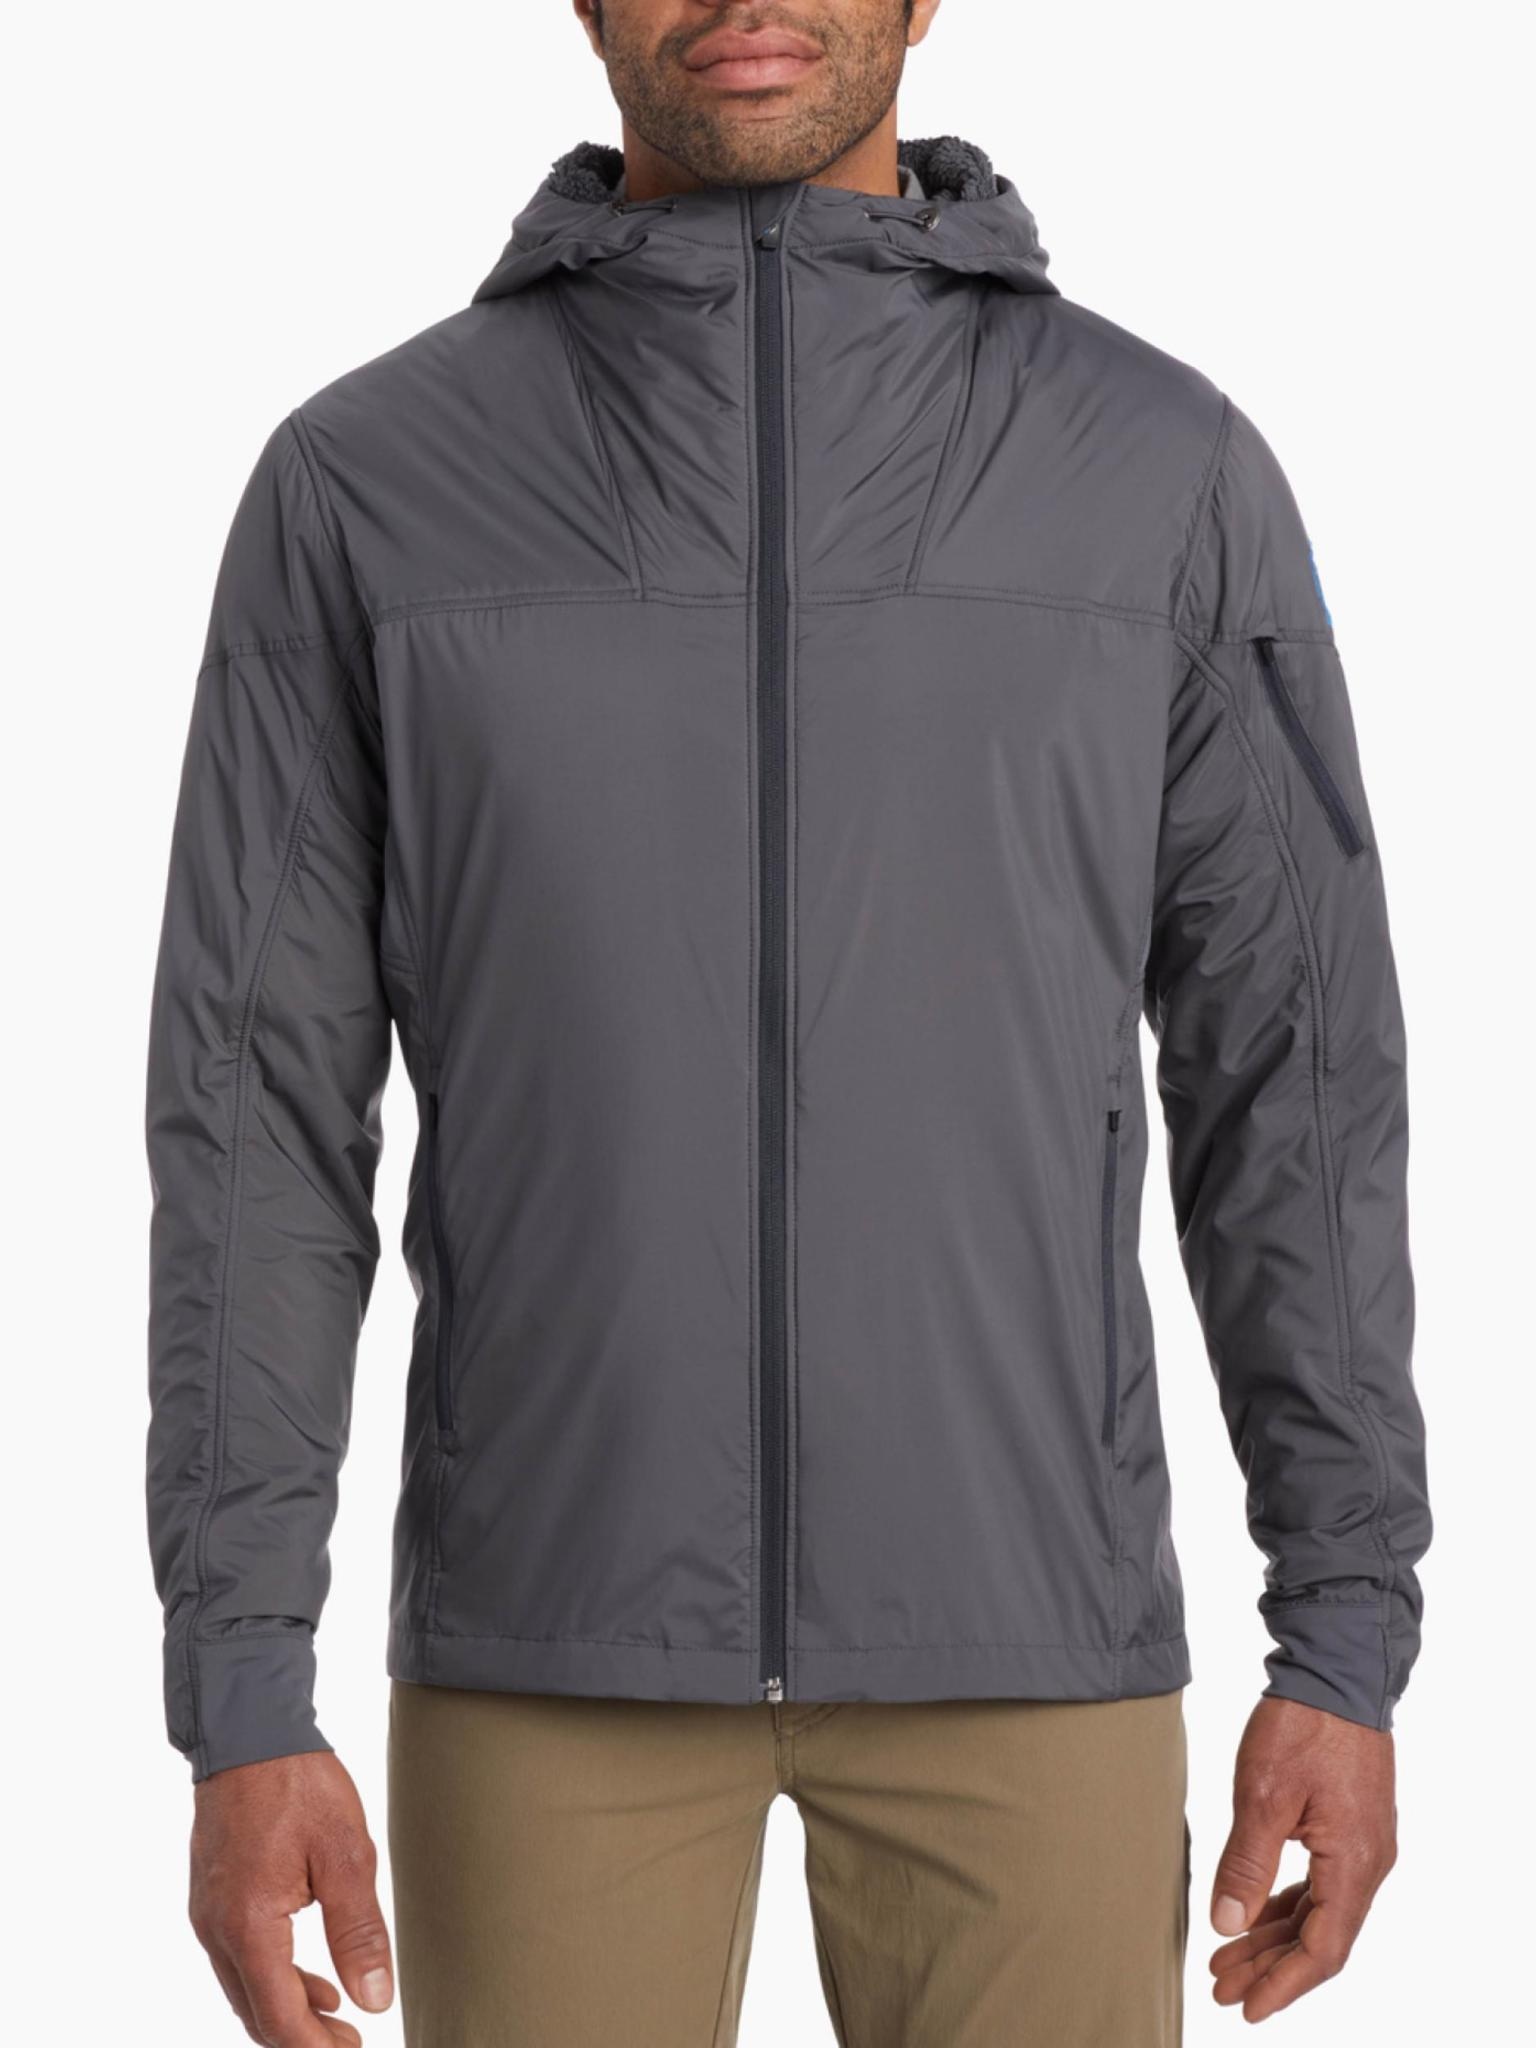 Men's The One Hoody - Chatham Outfitters